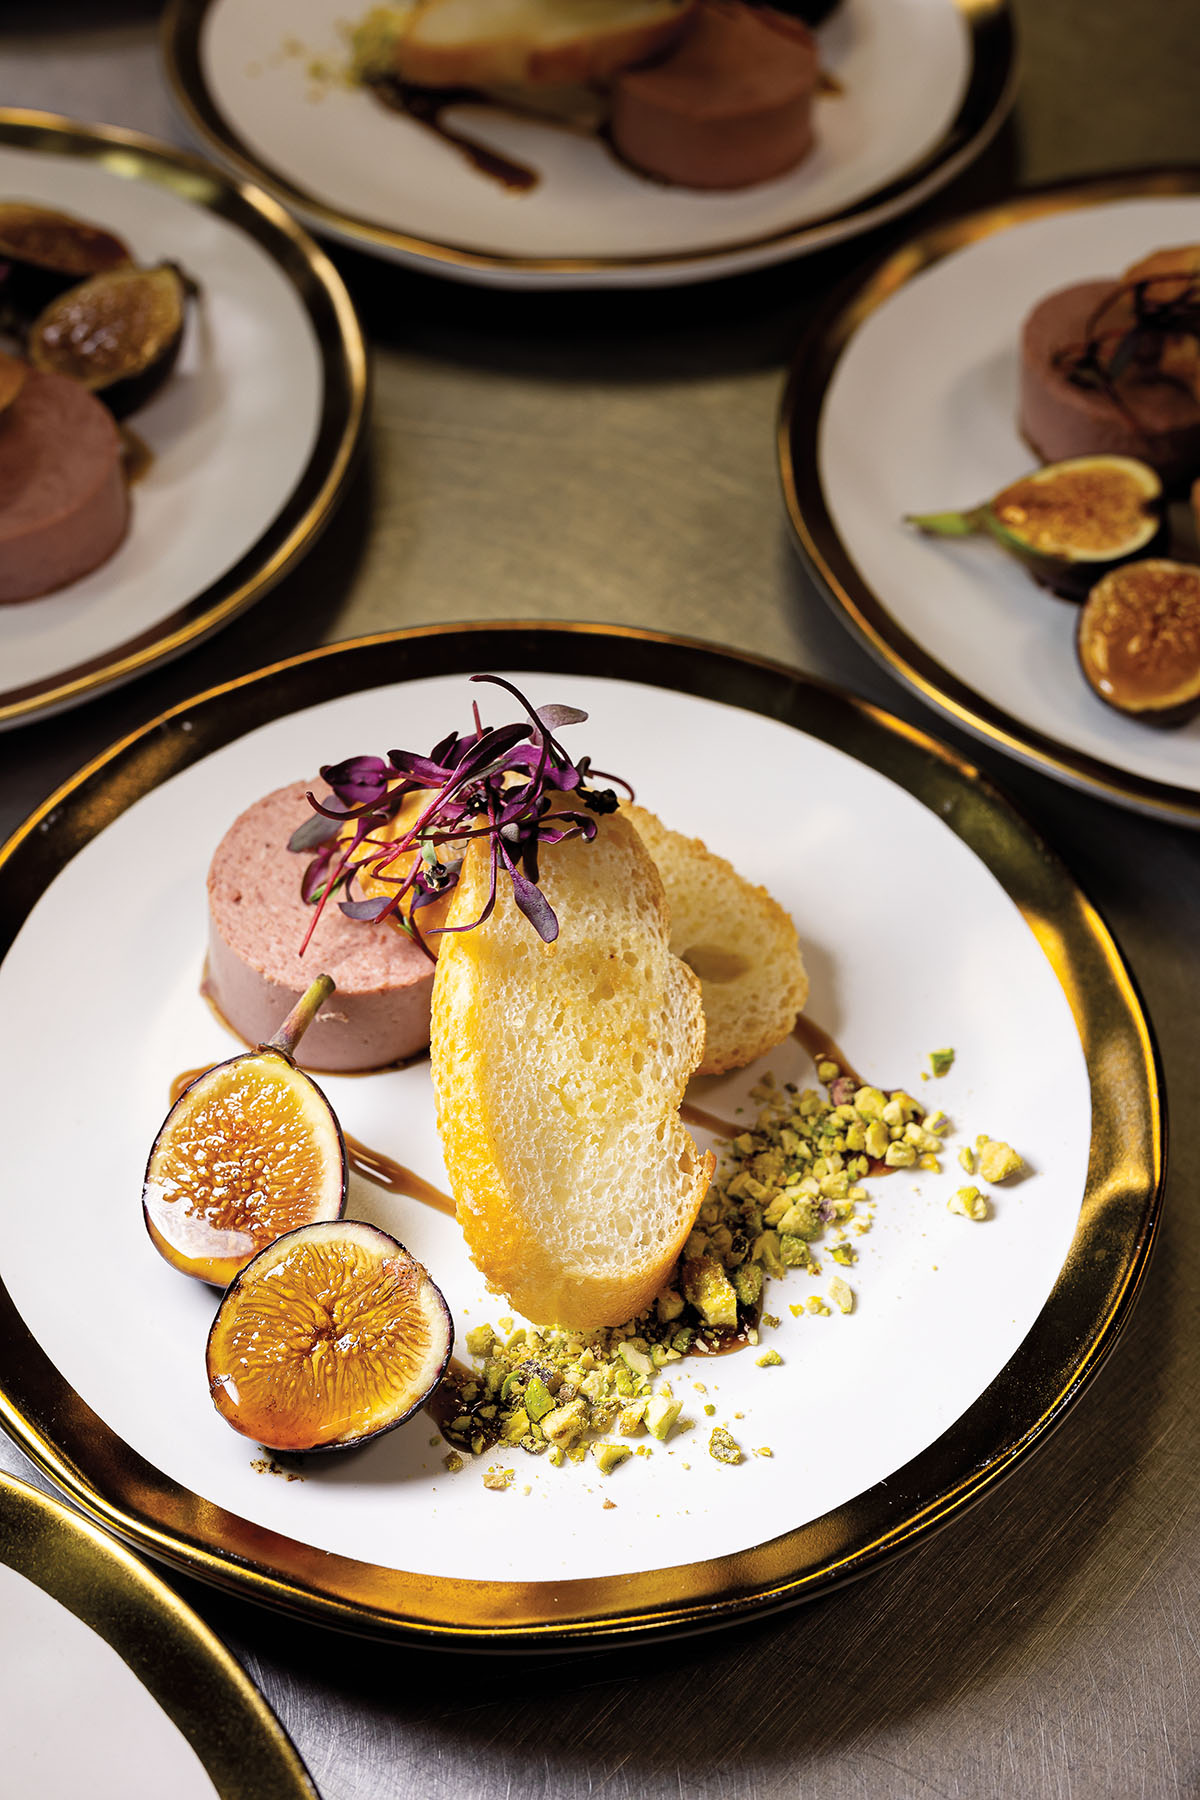 A collection of carefully plated dishes including a pink patÃ© with charred fig on a white plate